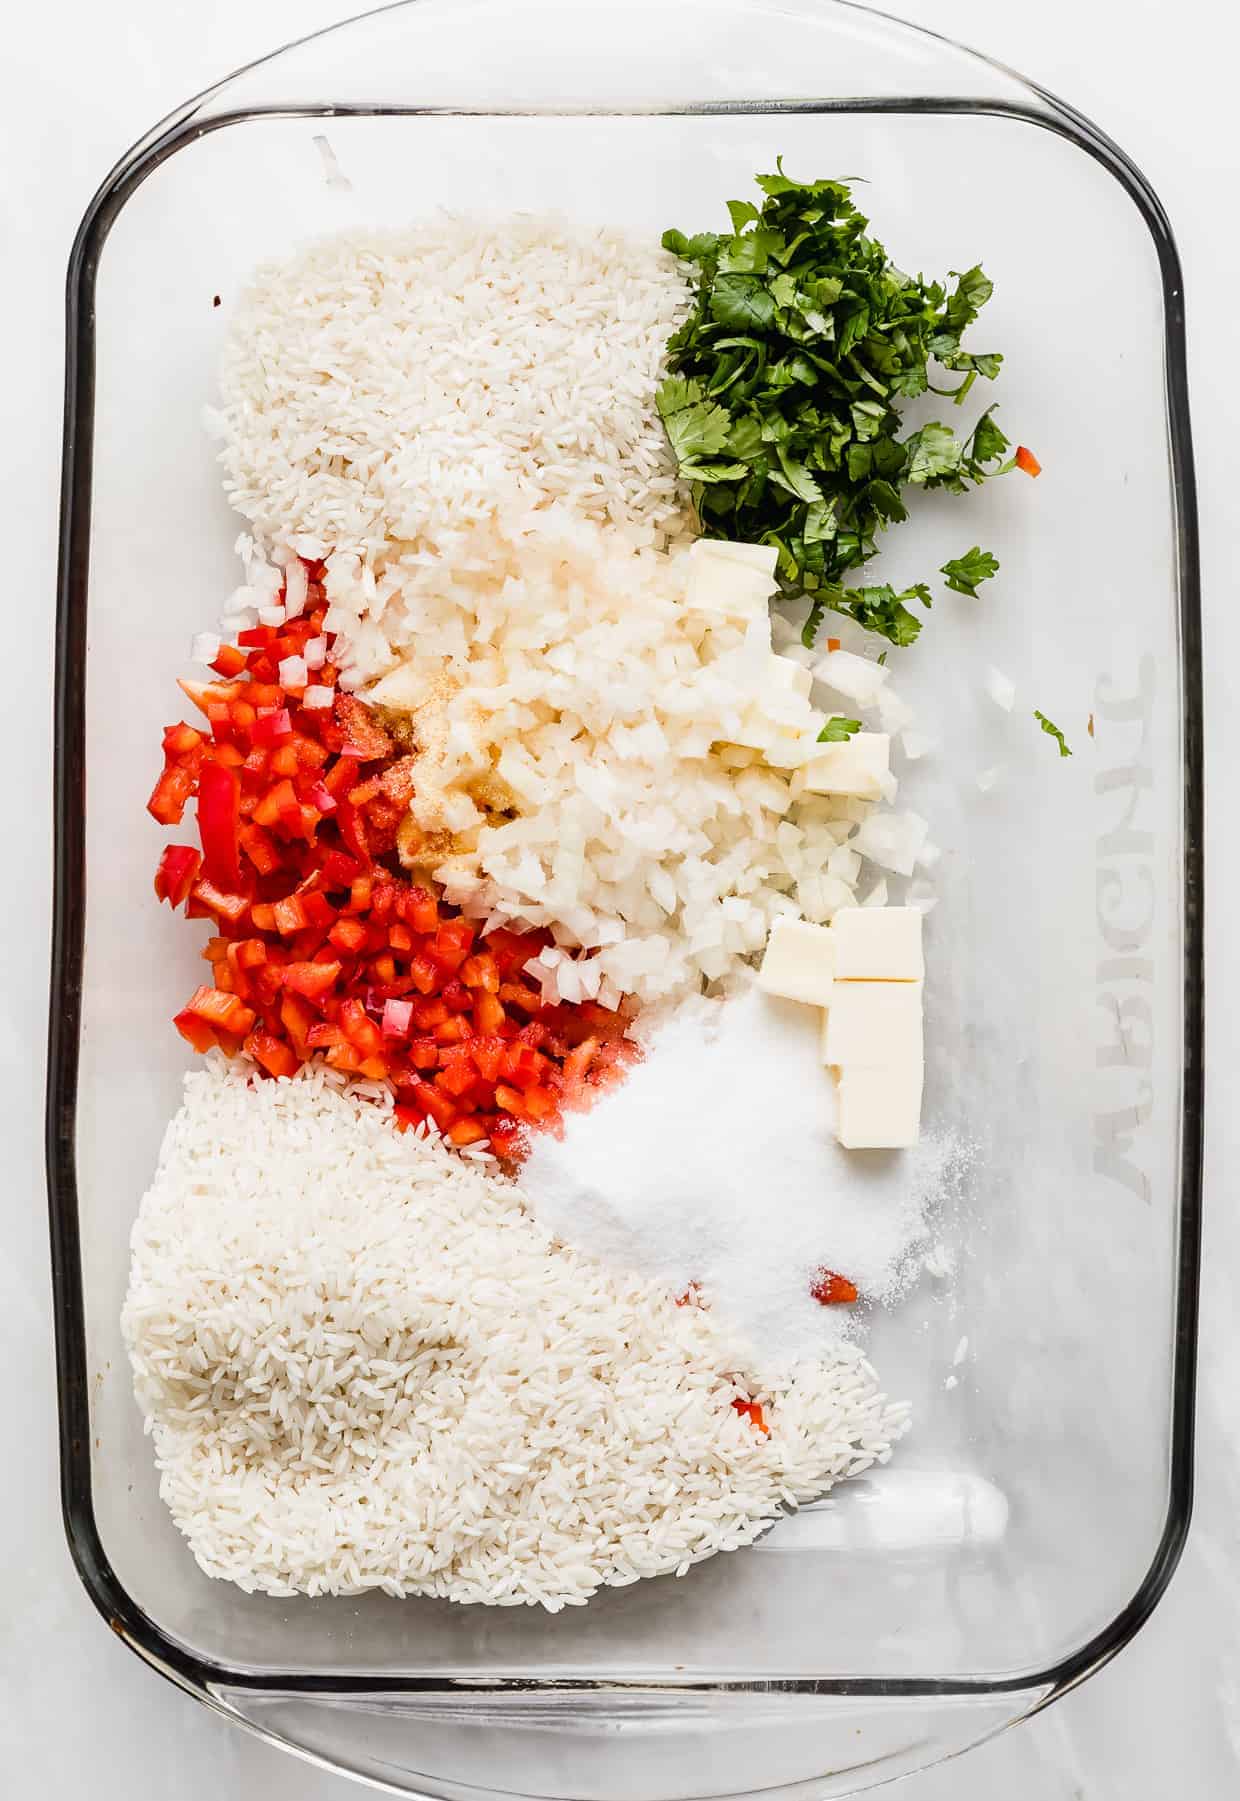 A glass baking dish with chopped red pepper, cilantro, white rice, sugar, salt and spices in it.